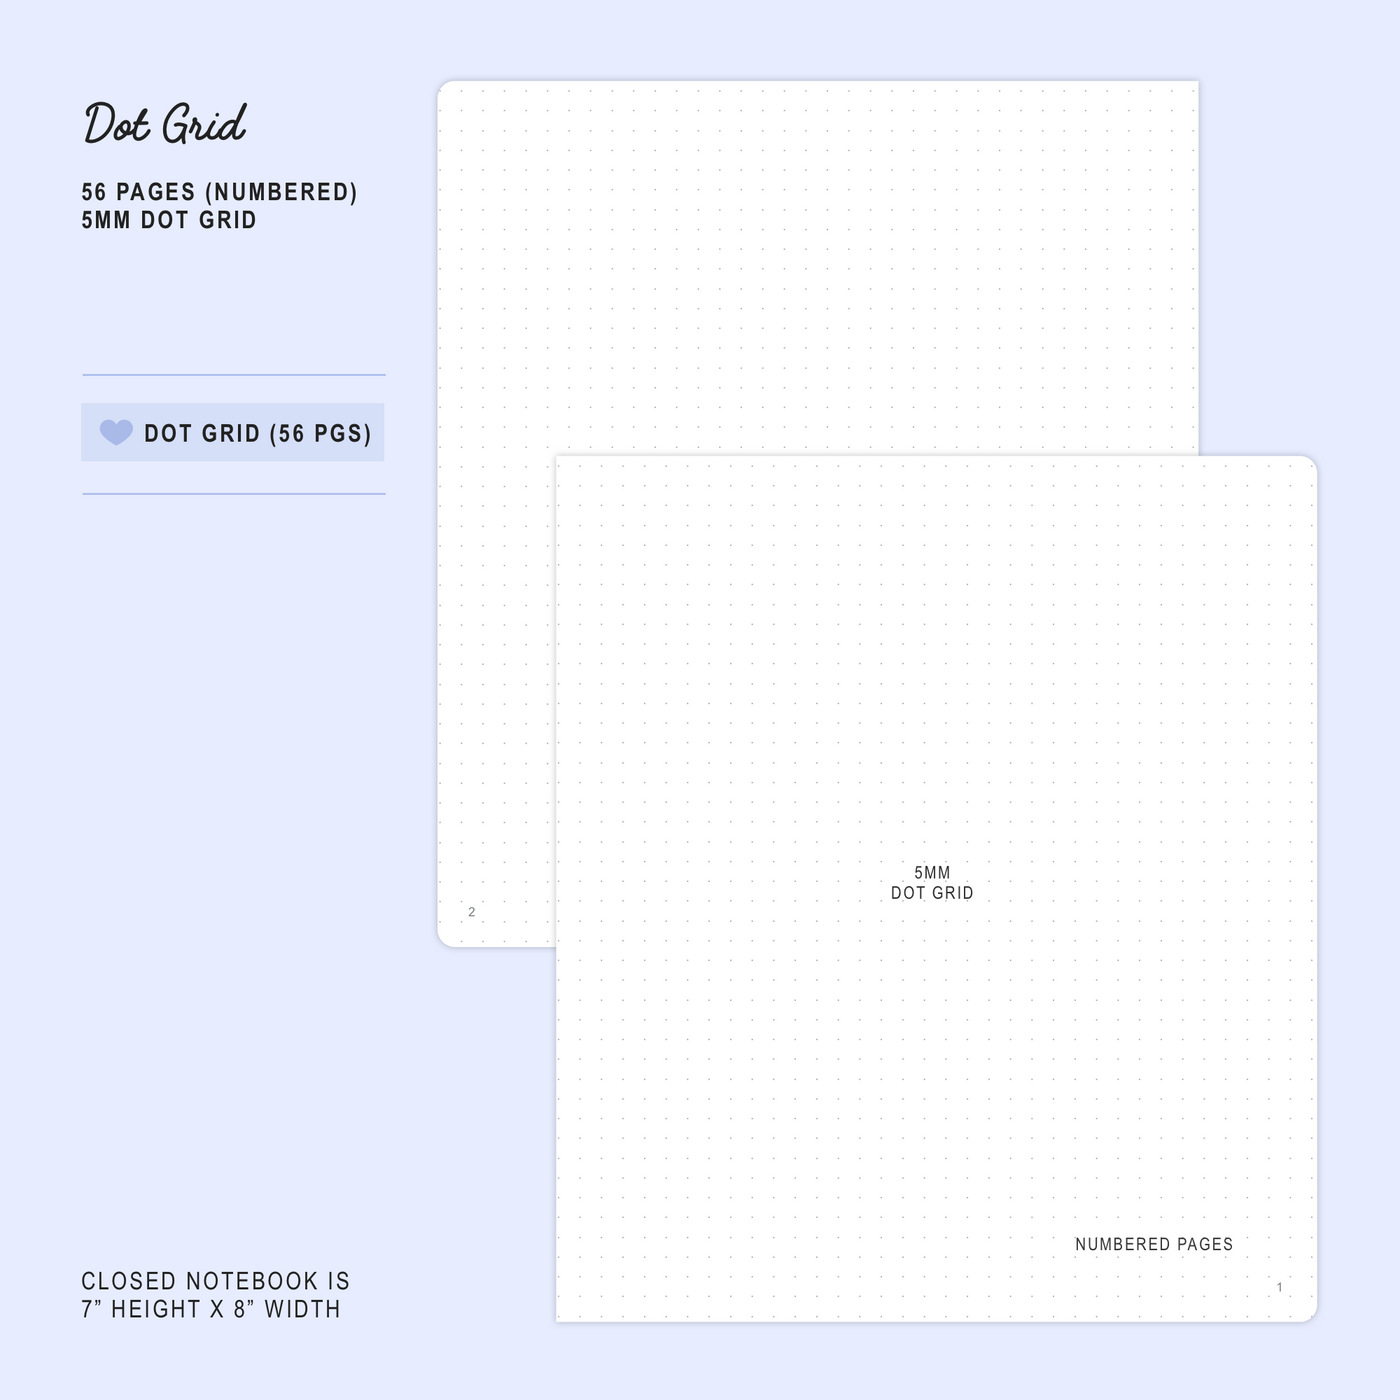 Pajama Party - Dot Grid Notebook (A5W)